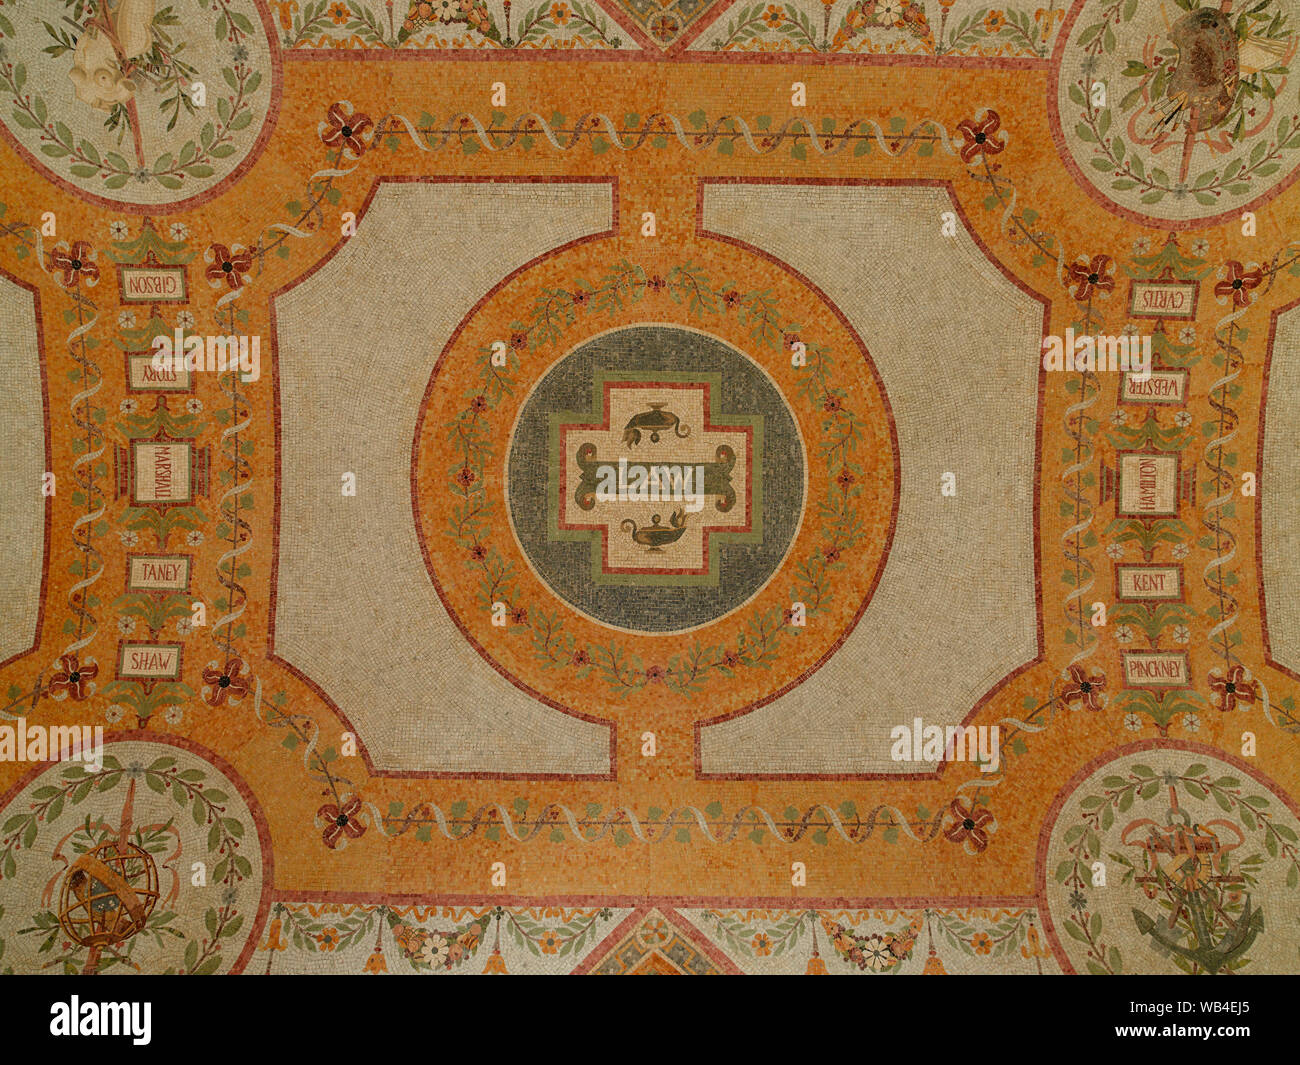 East corridor, Great Hall. Ceiling mosaic representing Law and naming Americans distinguished in law: Shaw, Taney, Marshall, Story, Gibson, Pinckney, Kent, Hamilton, Webster, Curtis. Library of Congress Thomas Jefferson Building, Washington, D.C. Stock Photo